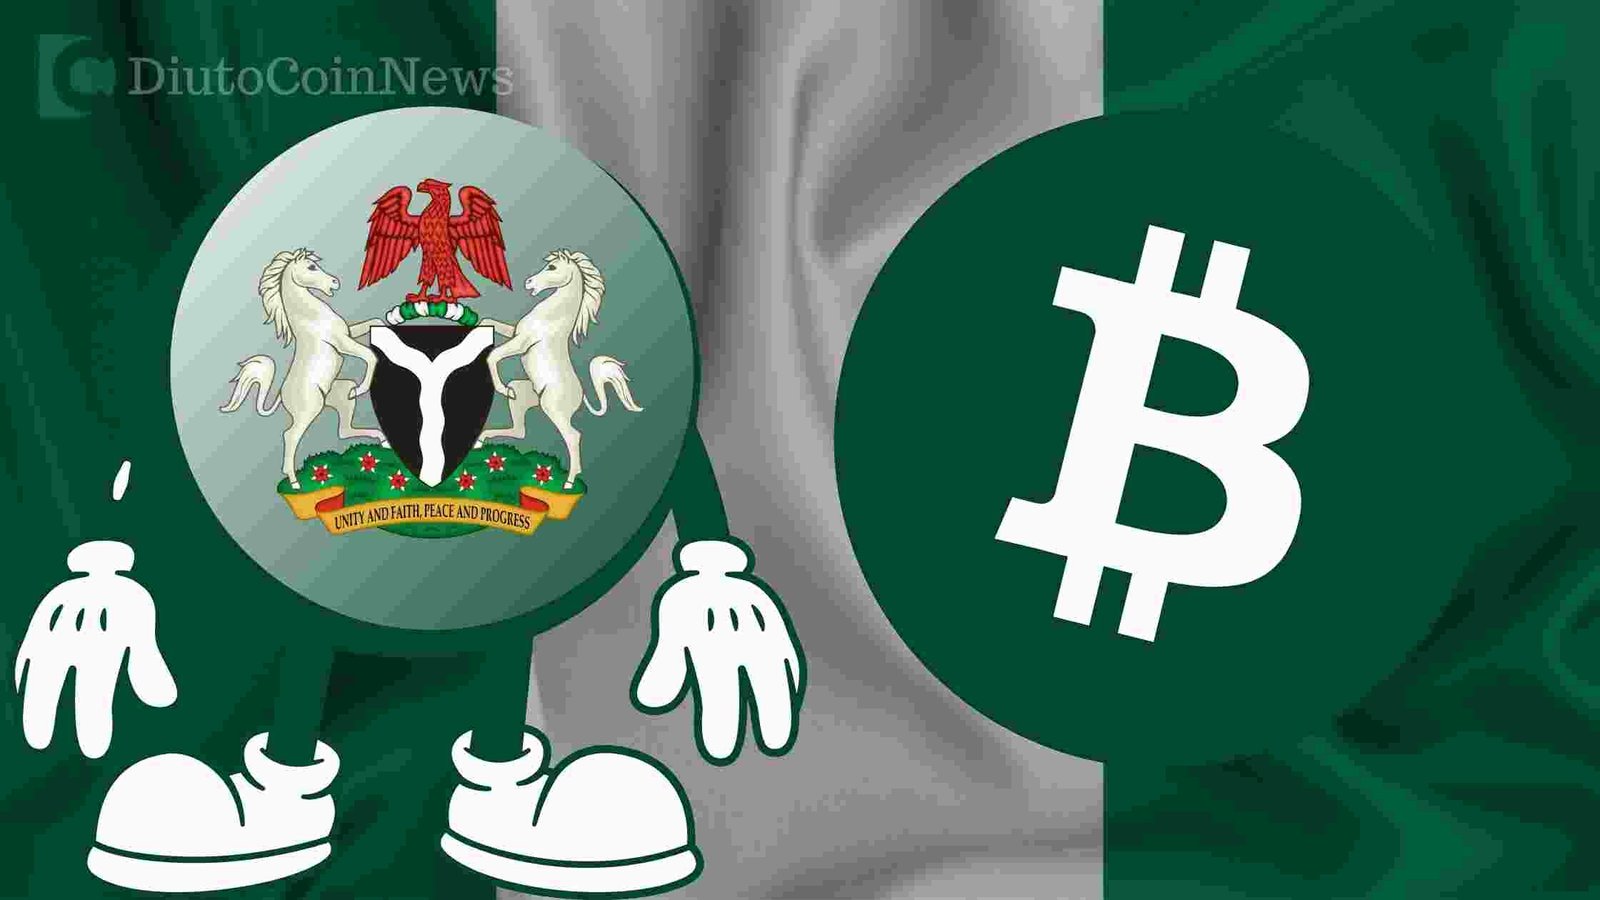 African Startup Launches Alternative Platform For Crypto Nigeria Users.